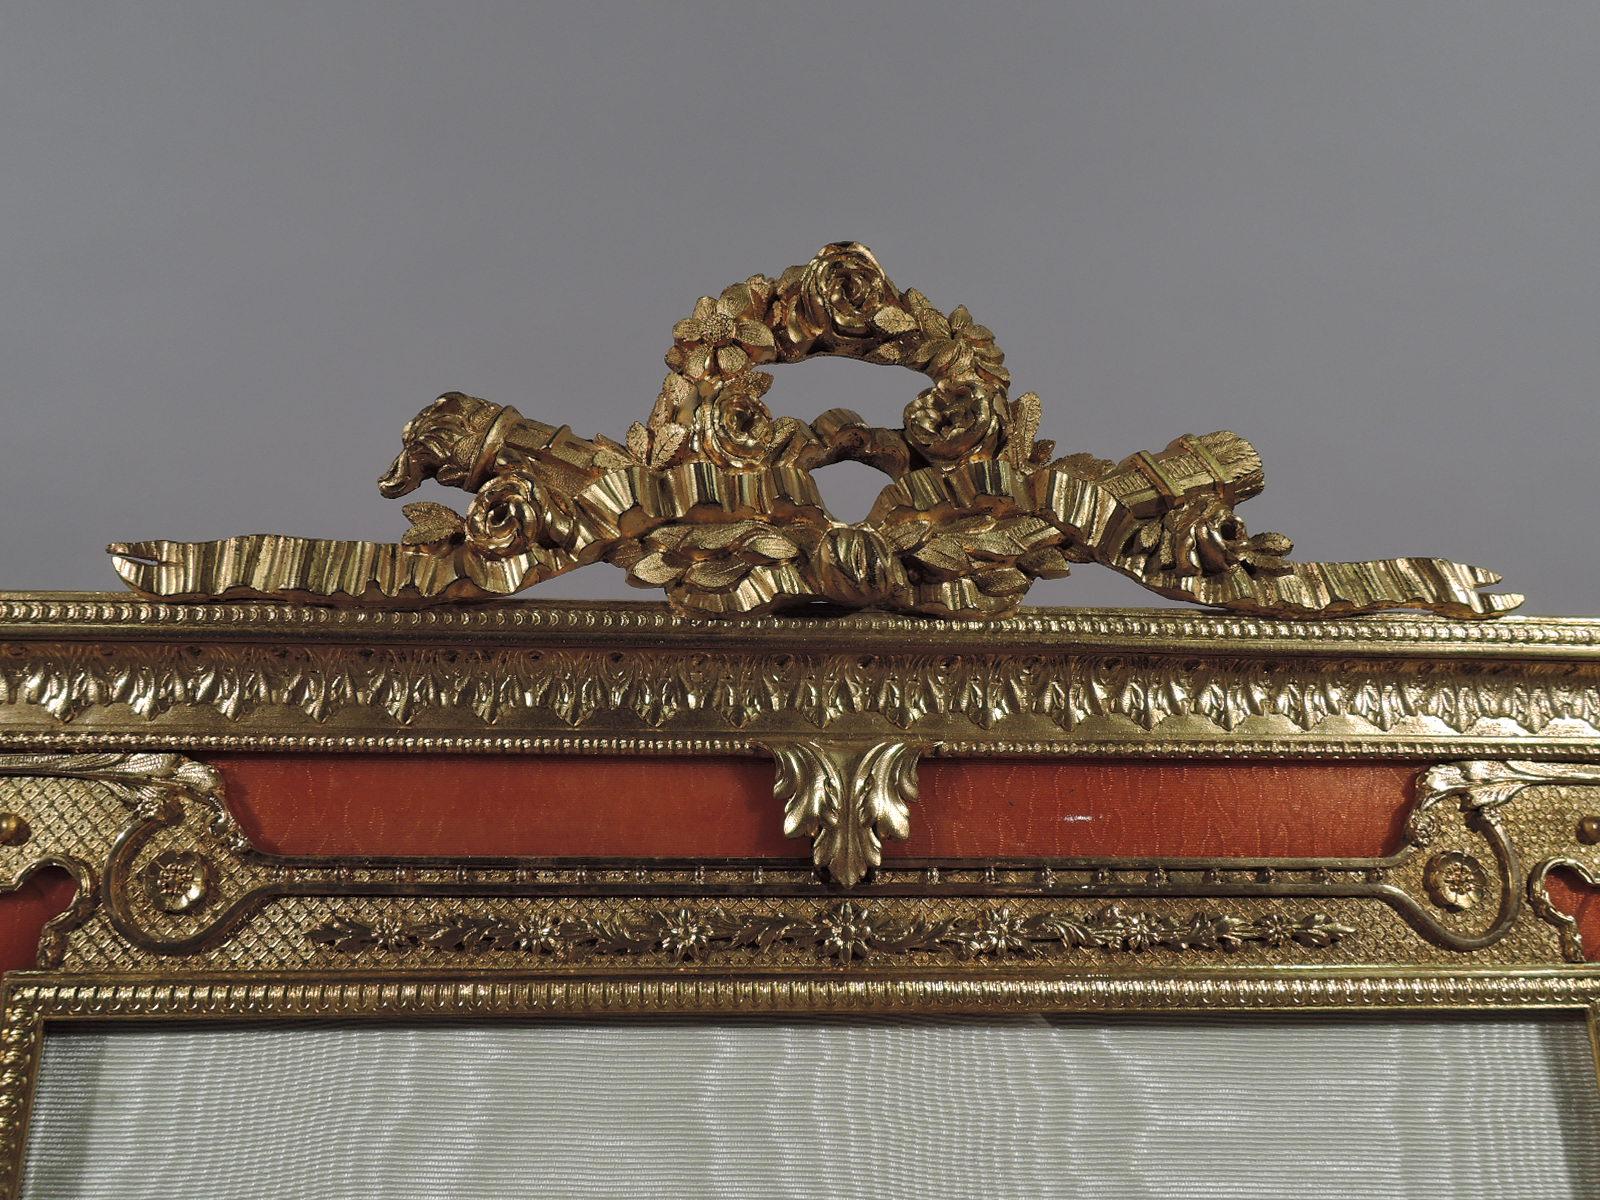 Turn-of-the-century French Rococo gilt bronze and pink guilloche enamel picture frame. Rectangular window in same surround with beading and leaf-and-dart ornament. Window bordered by diaper with applied flowers and leaves, and open block corners